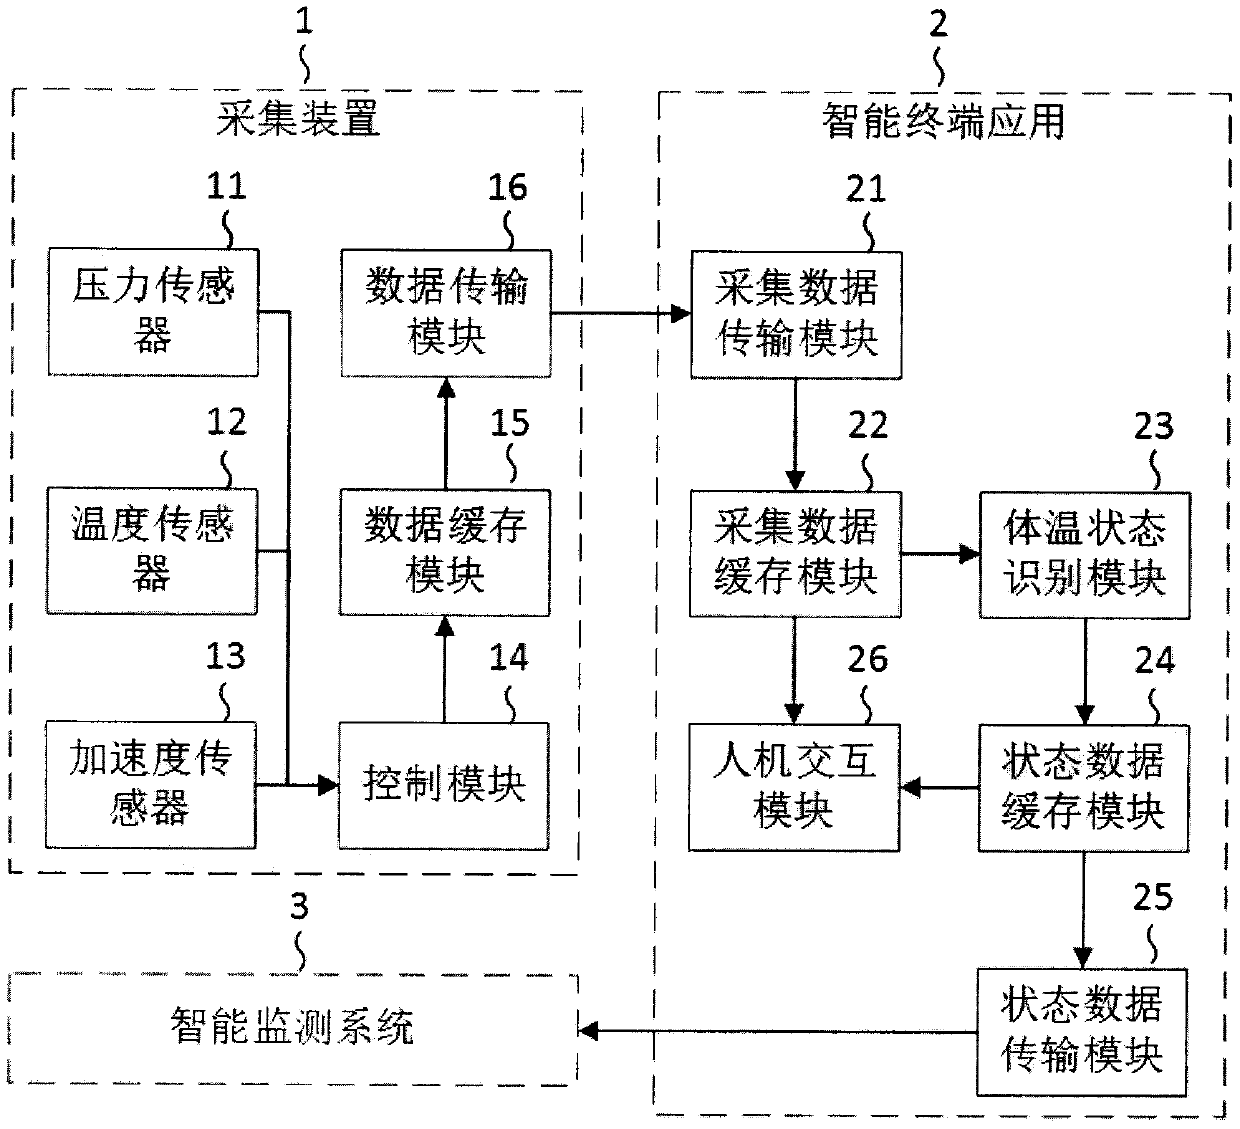 Animal body temperature monitoring system and machine learning based body temperature state recognition method